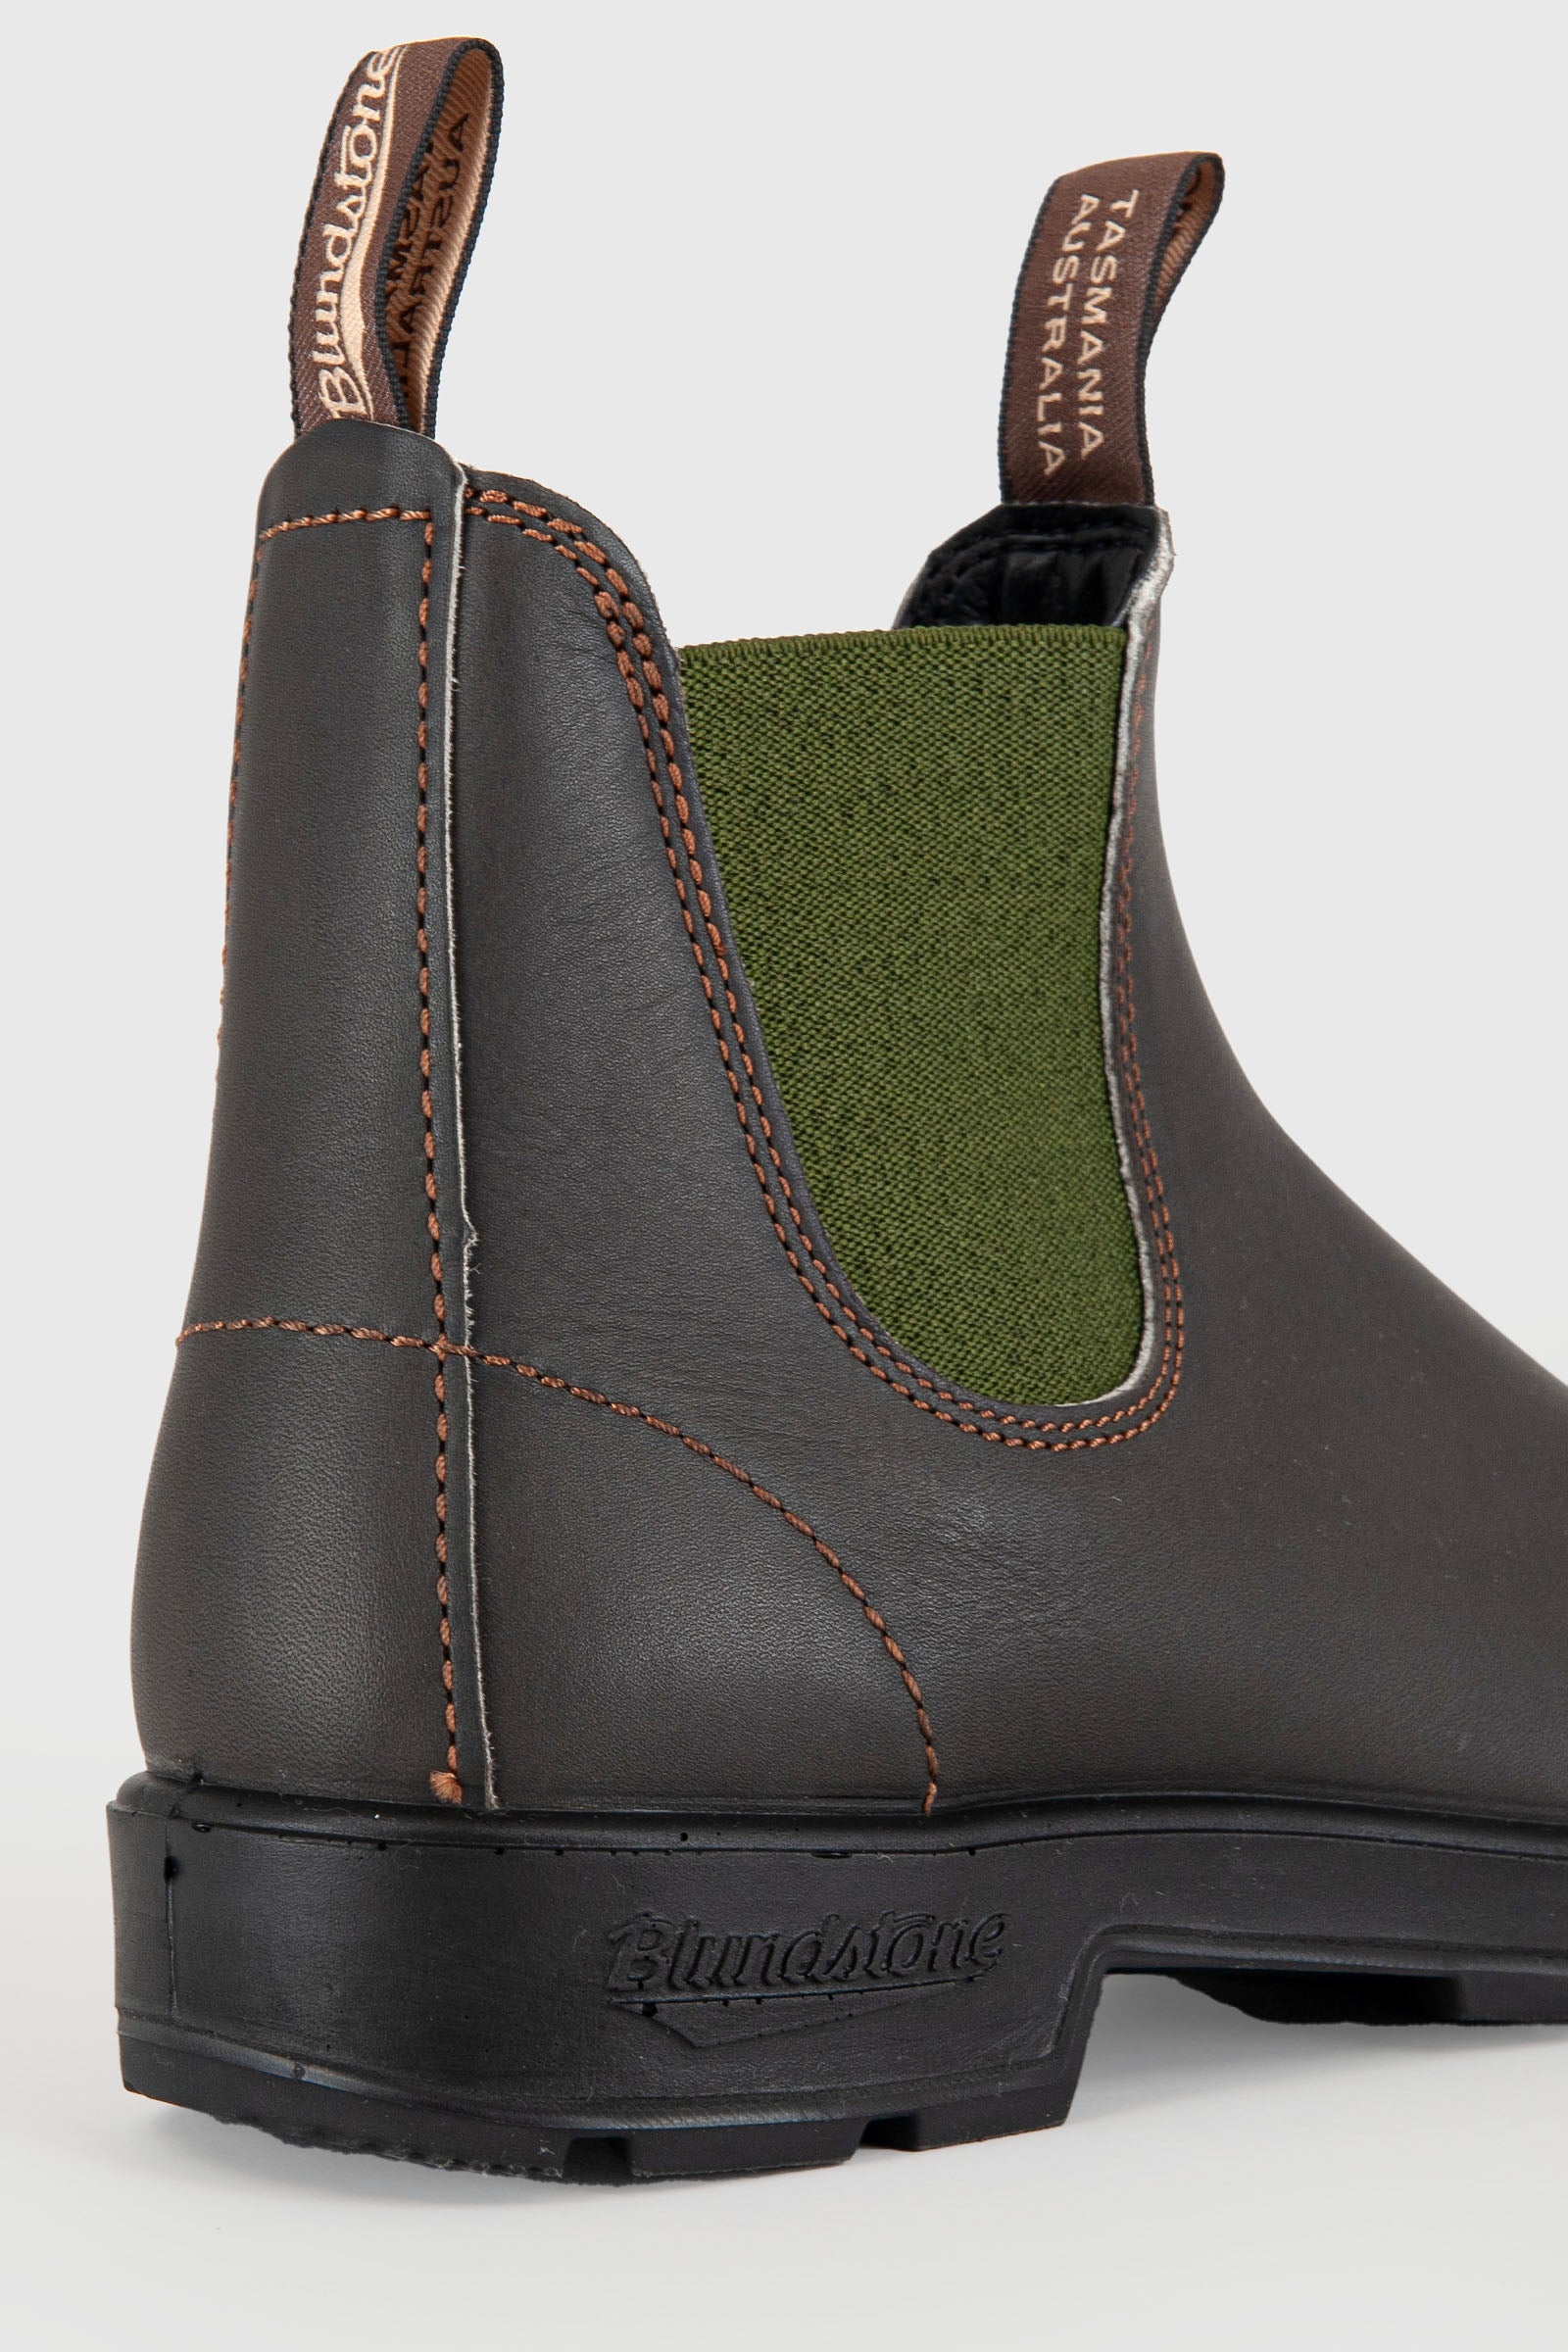 Blundstone Stivaletto Beatle 519 Pelle Stout Brown/Olive - 2